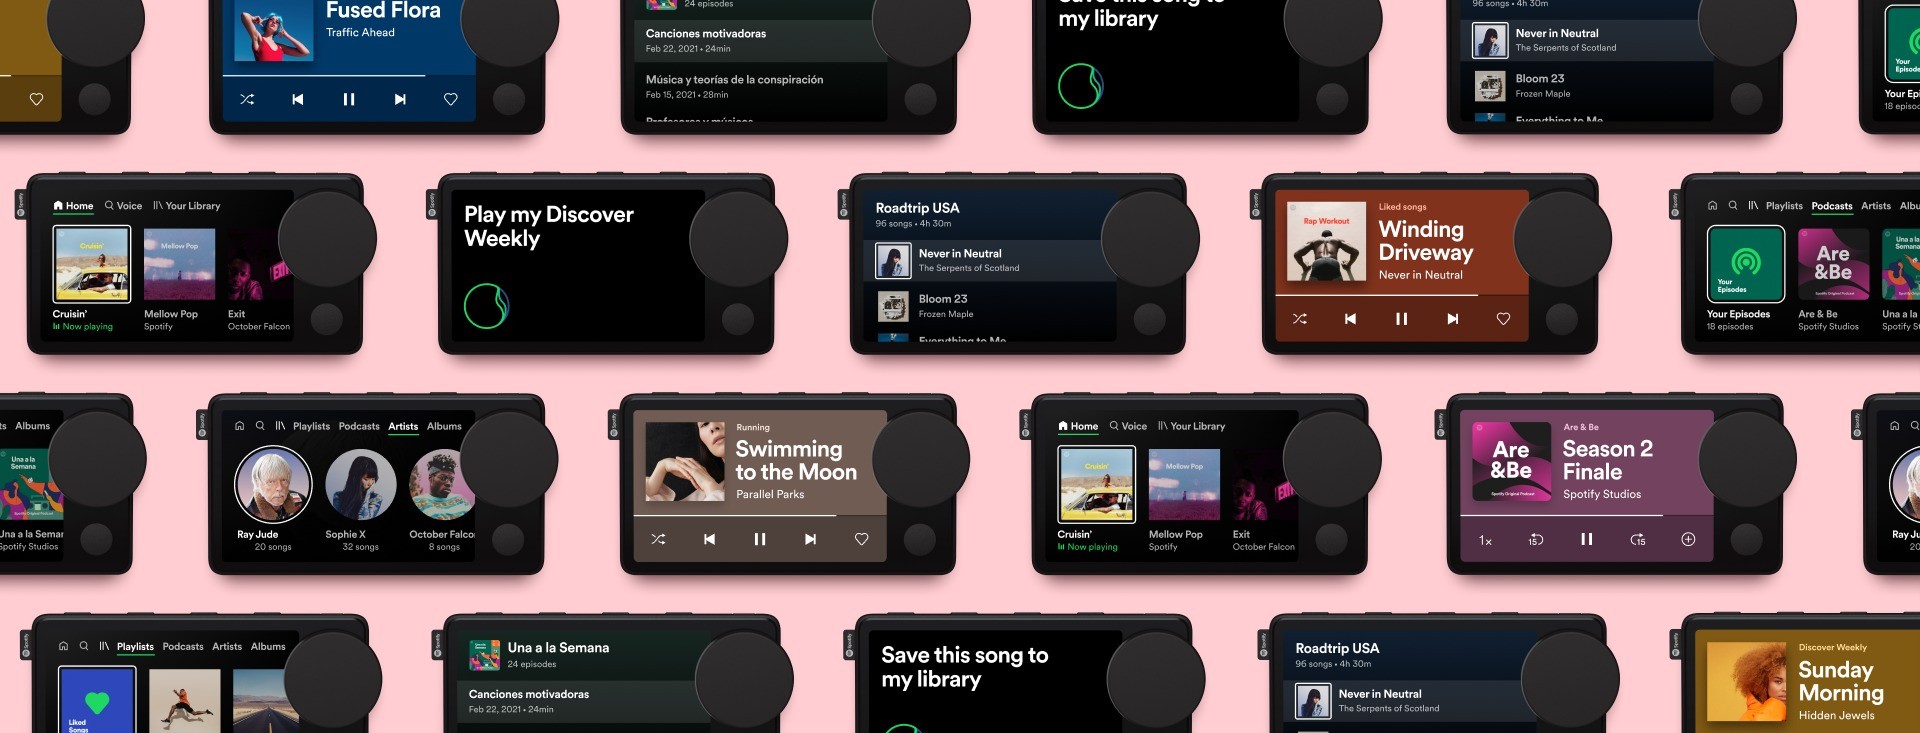 Spotify Launches “Hey, Spotify” and It All Makes Sense Now - autoevolution